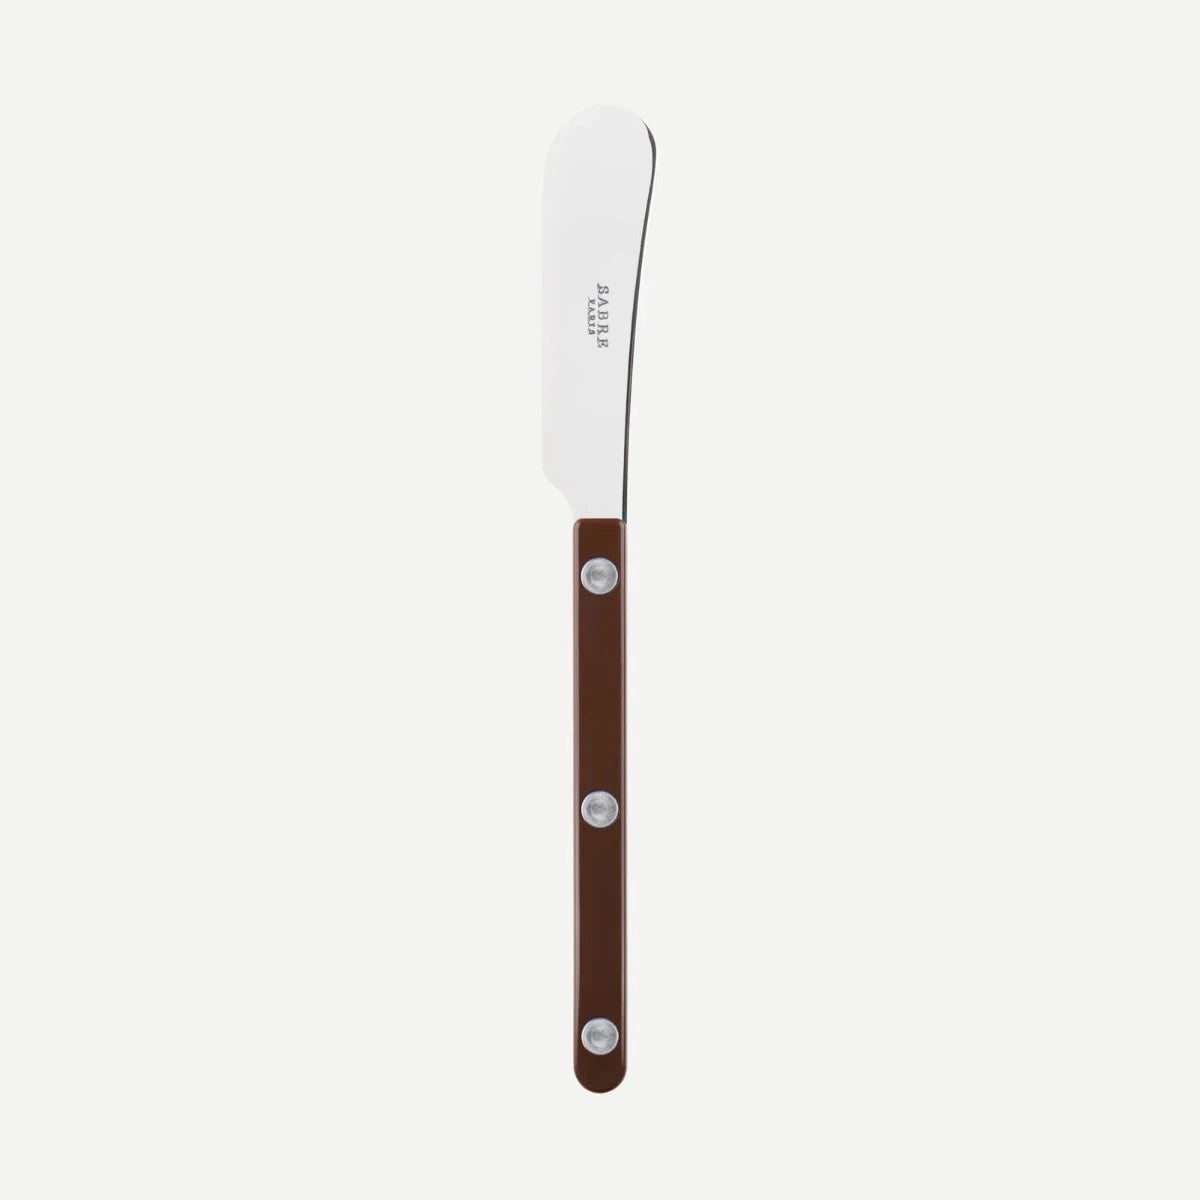 Bistrot Cutlery // Chocolate